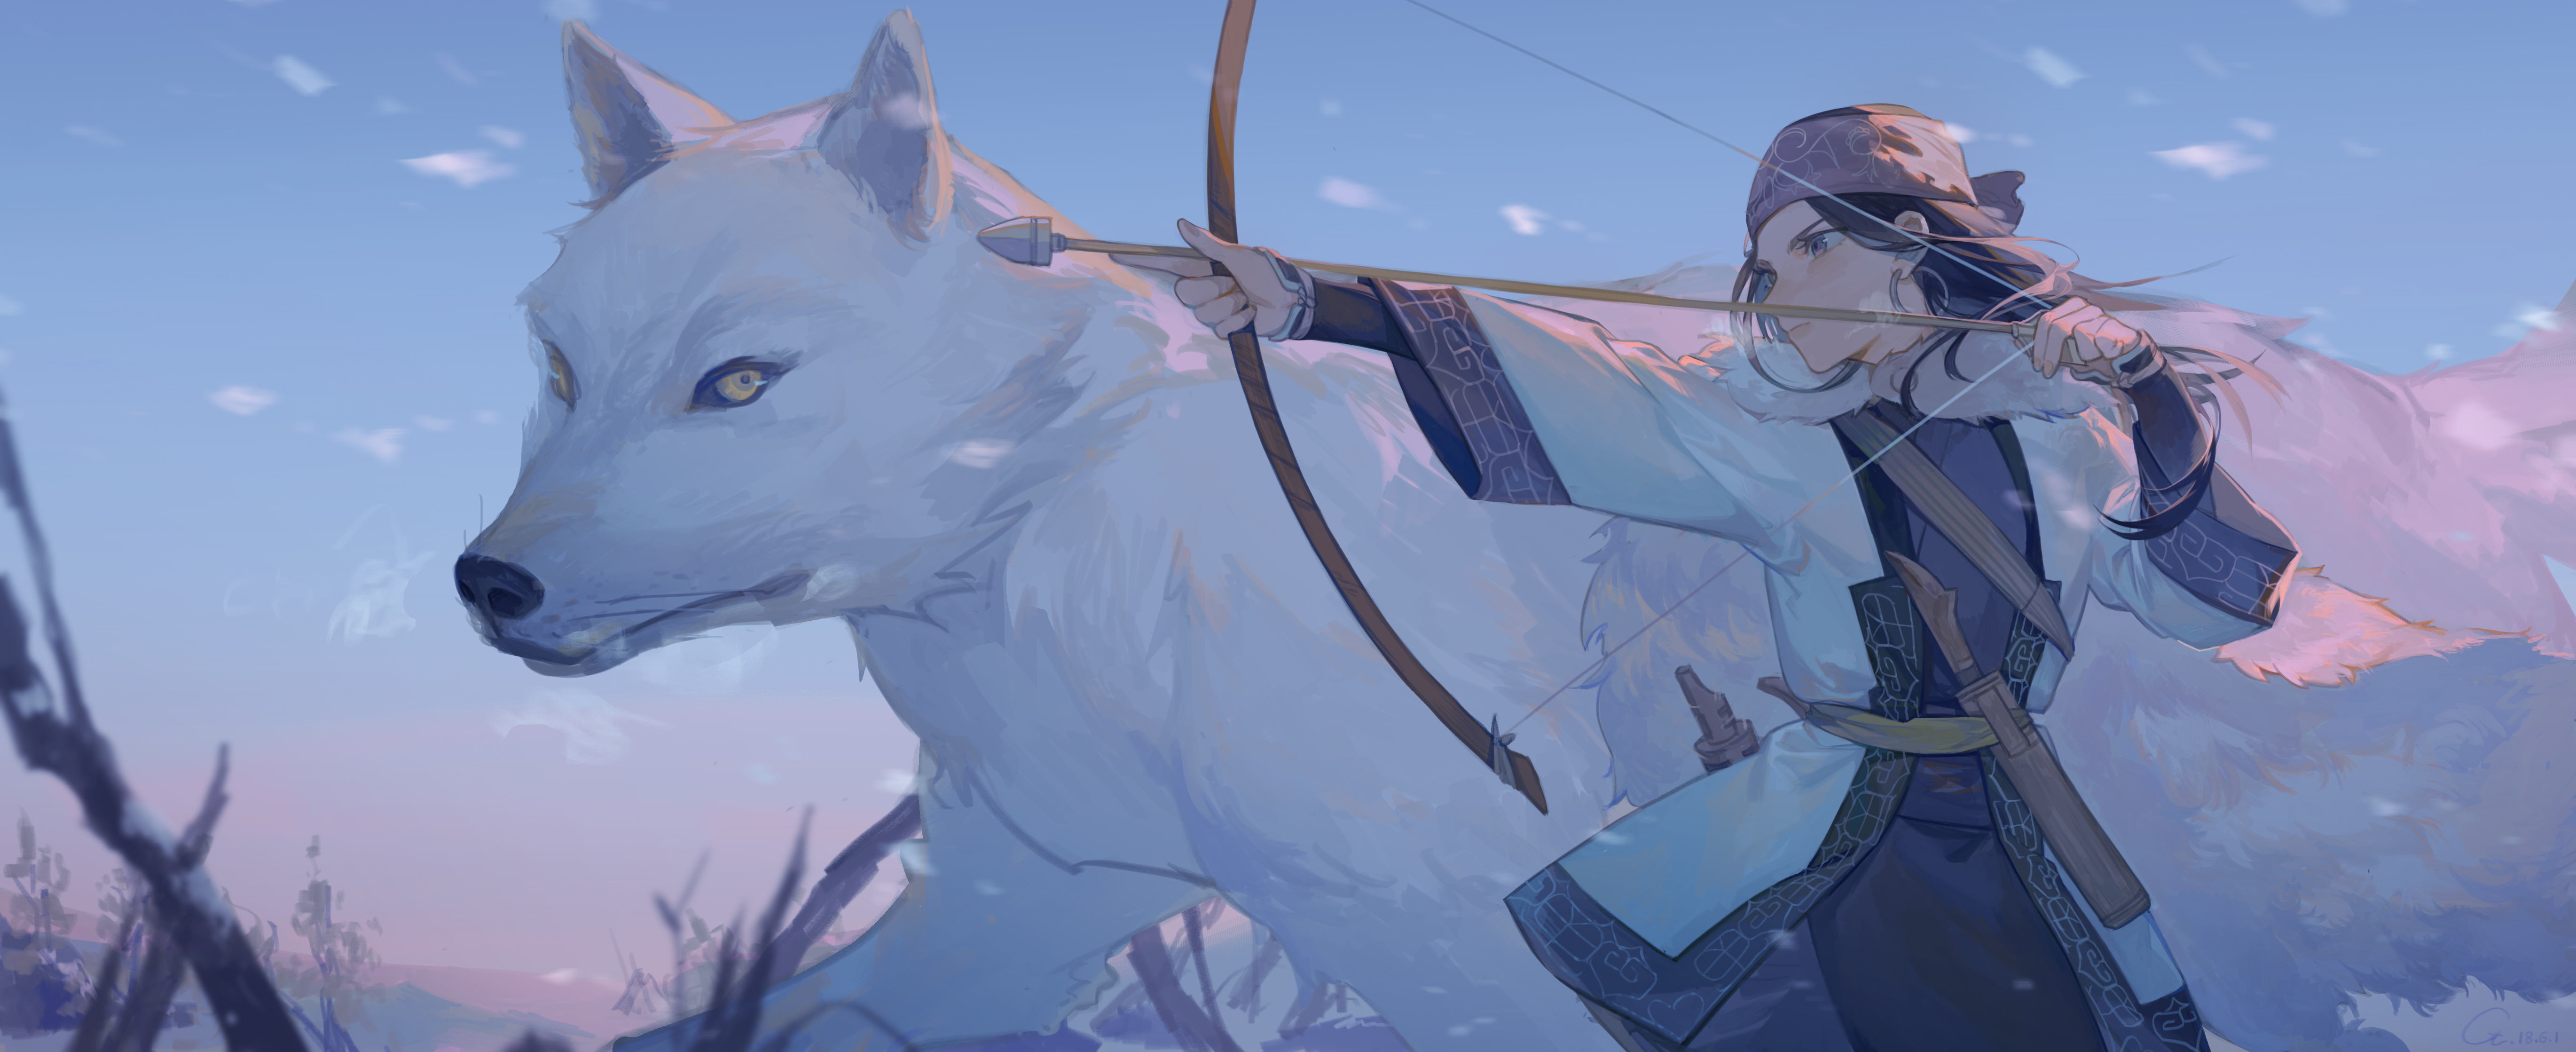 Anime Golden Kamuy 4k Ultra HD Wallpaper by CT